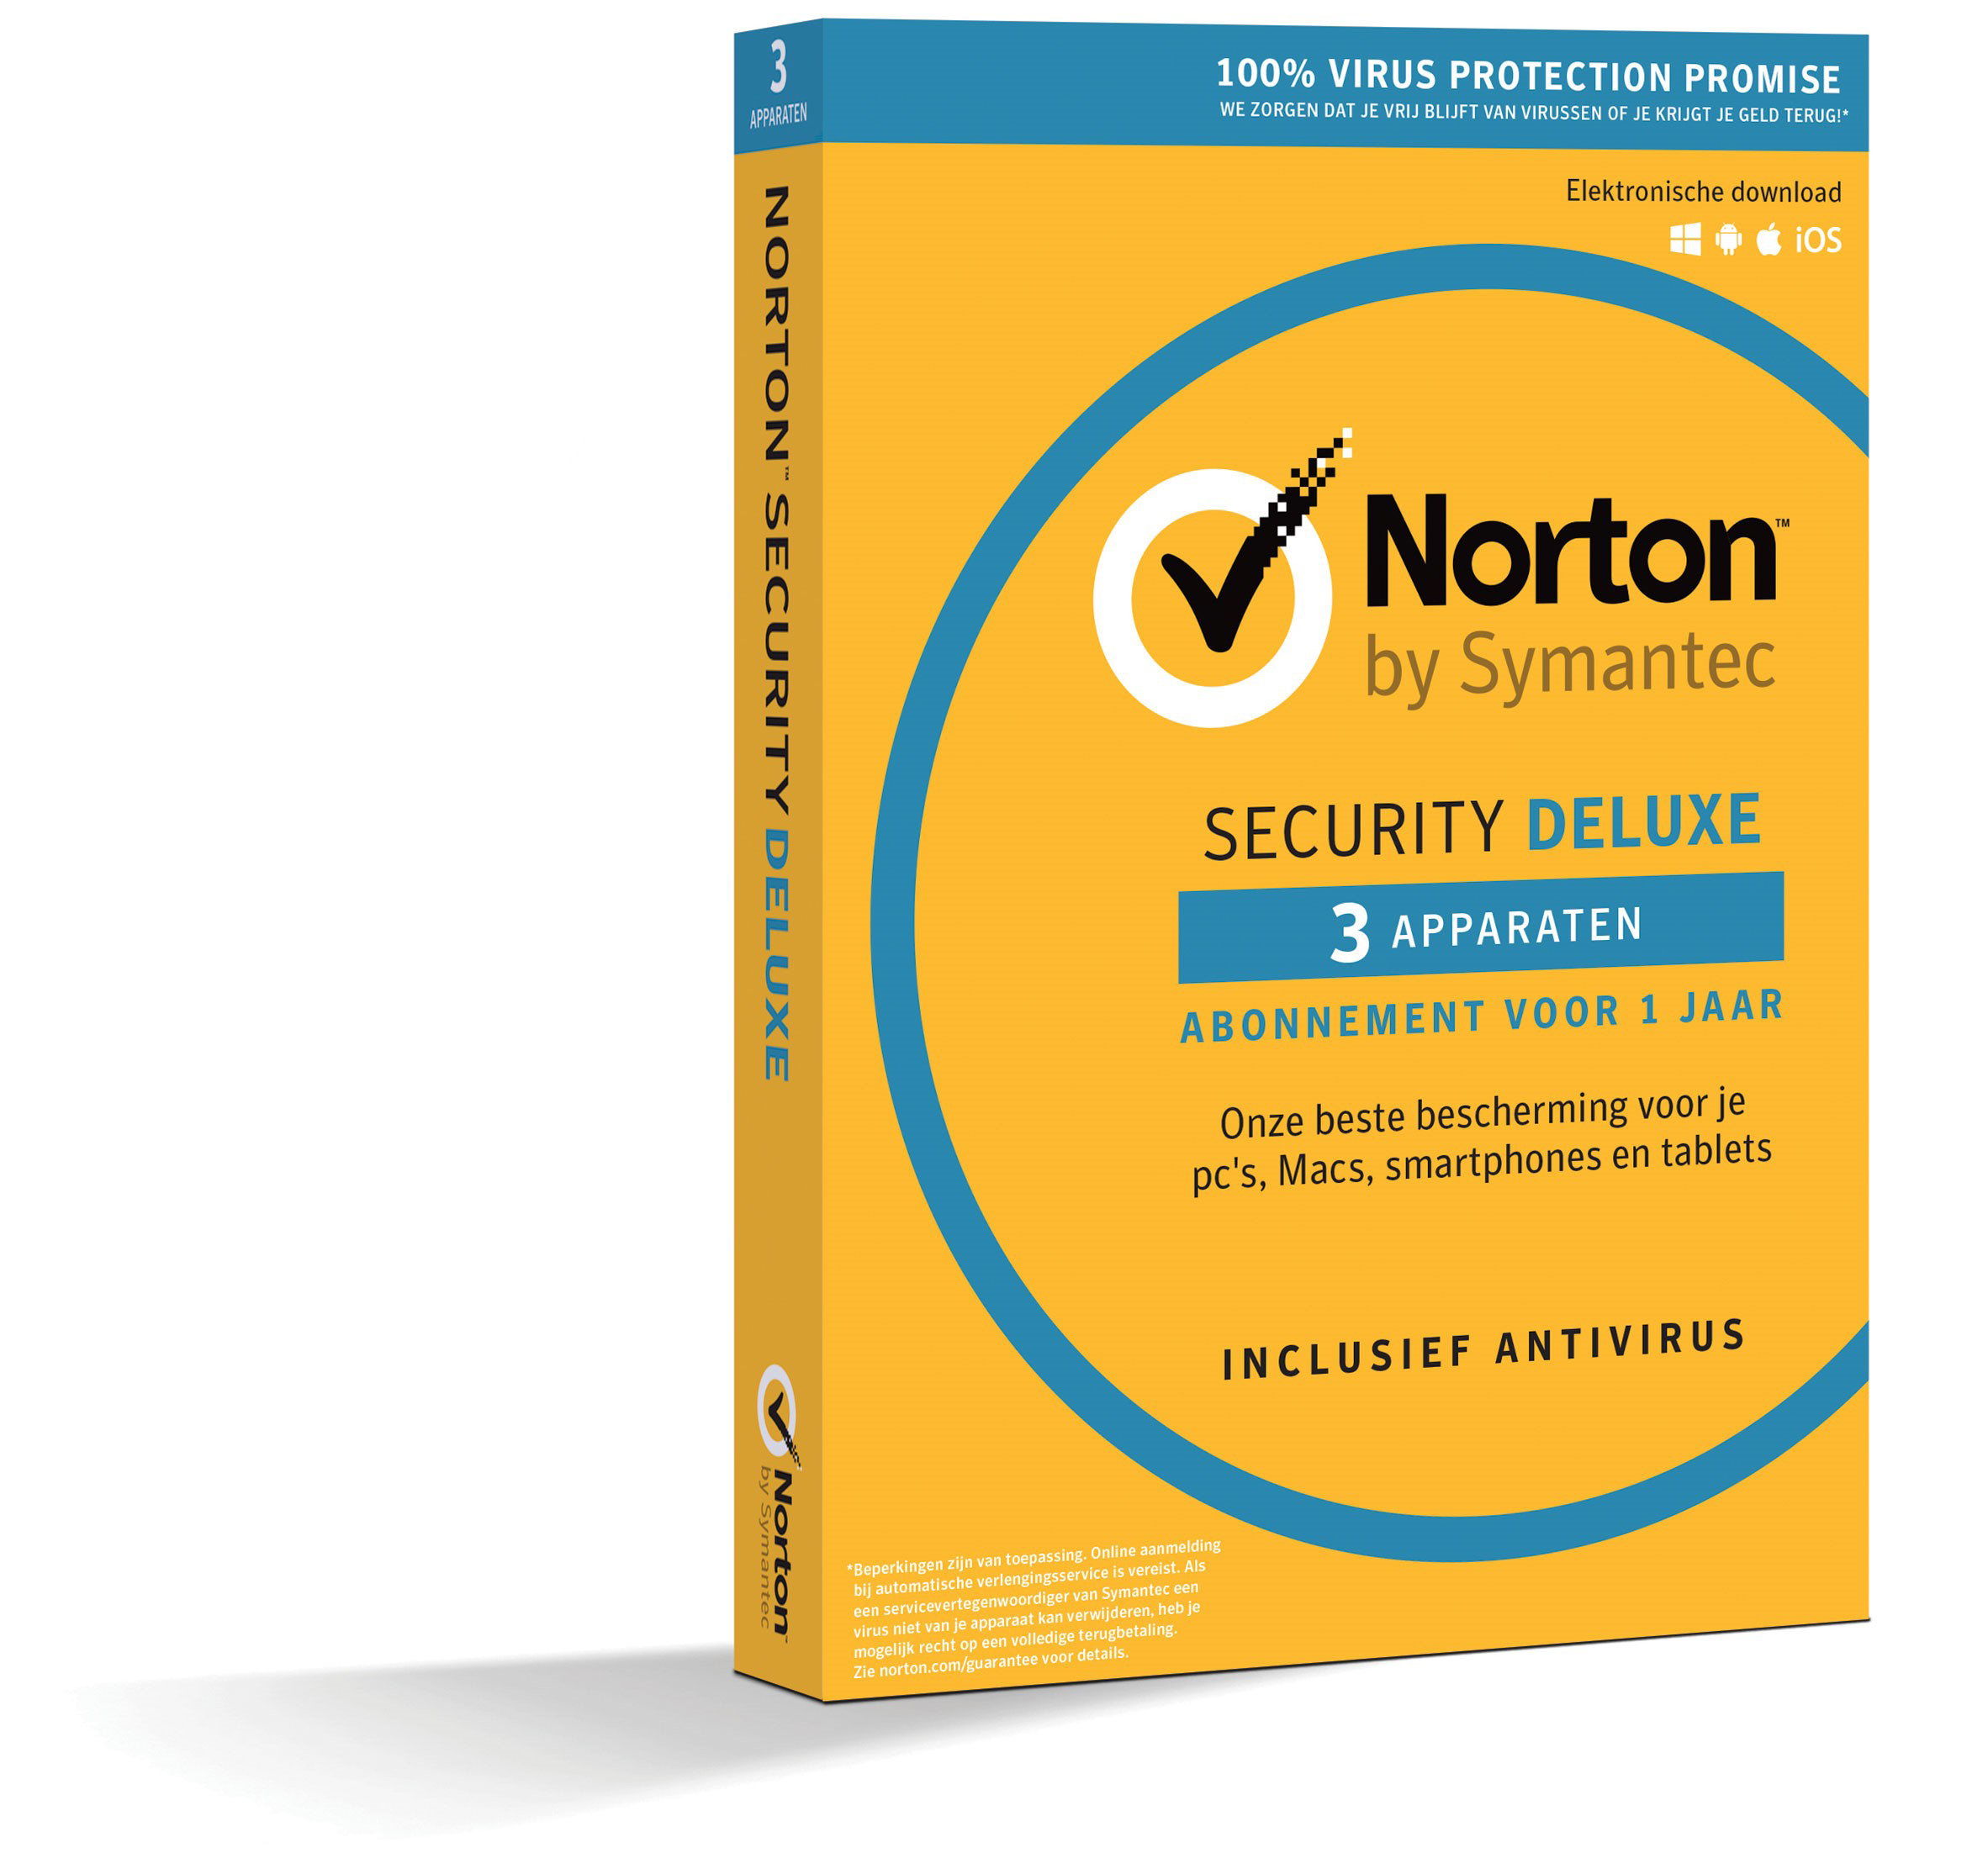 Norton Security 2019 (Includes Features of Internet Security)